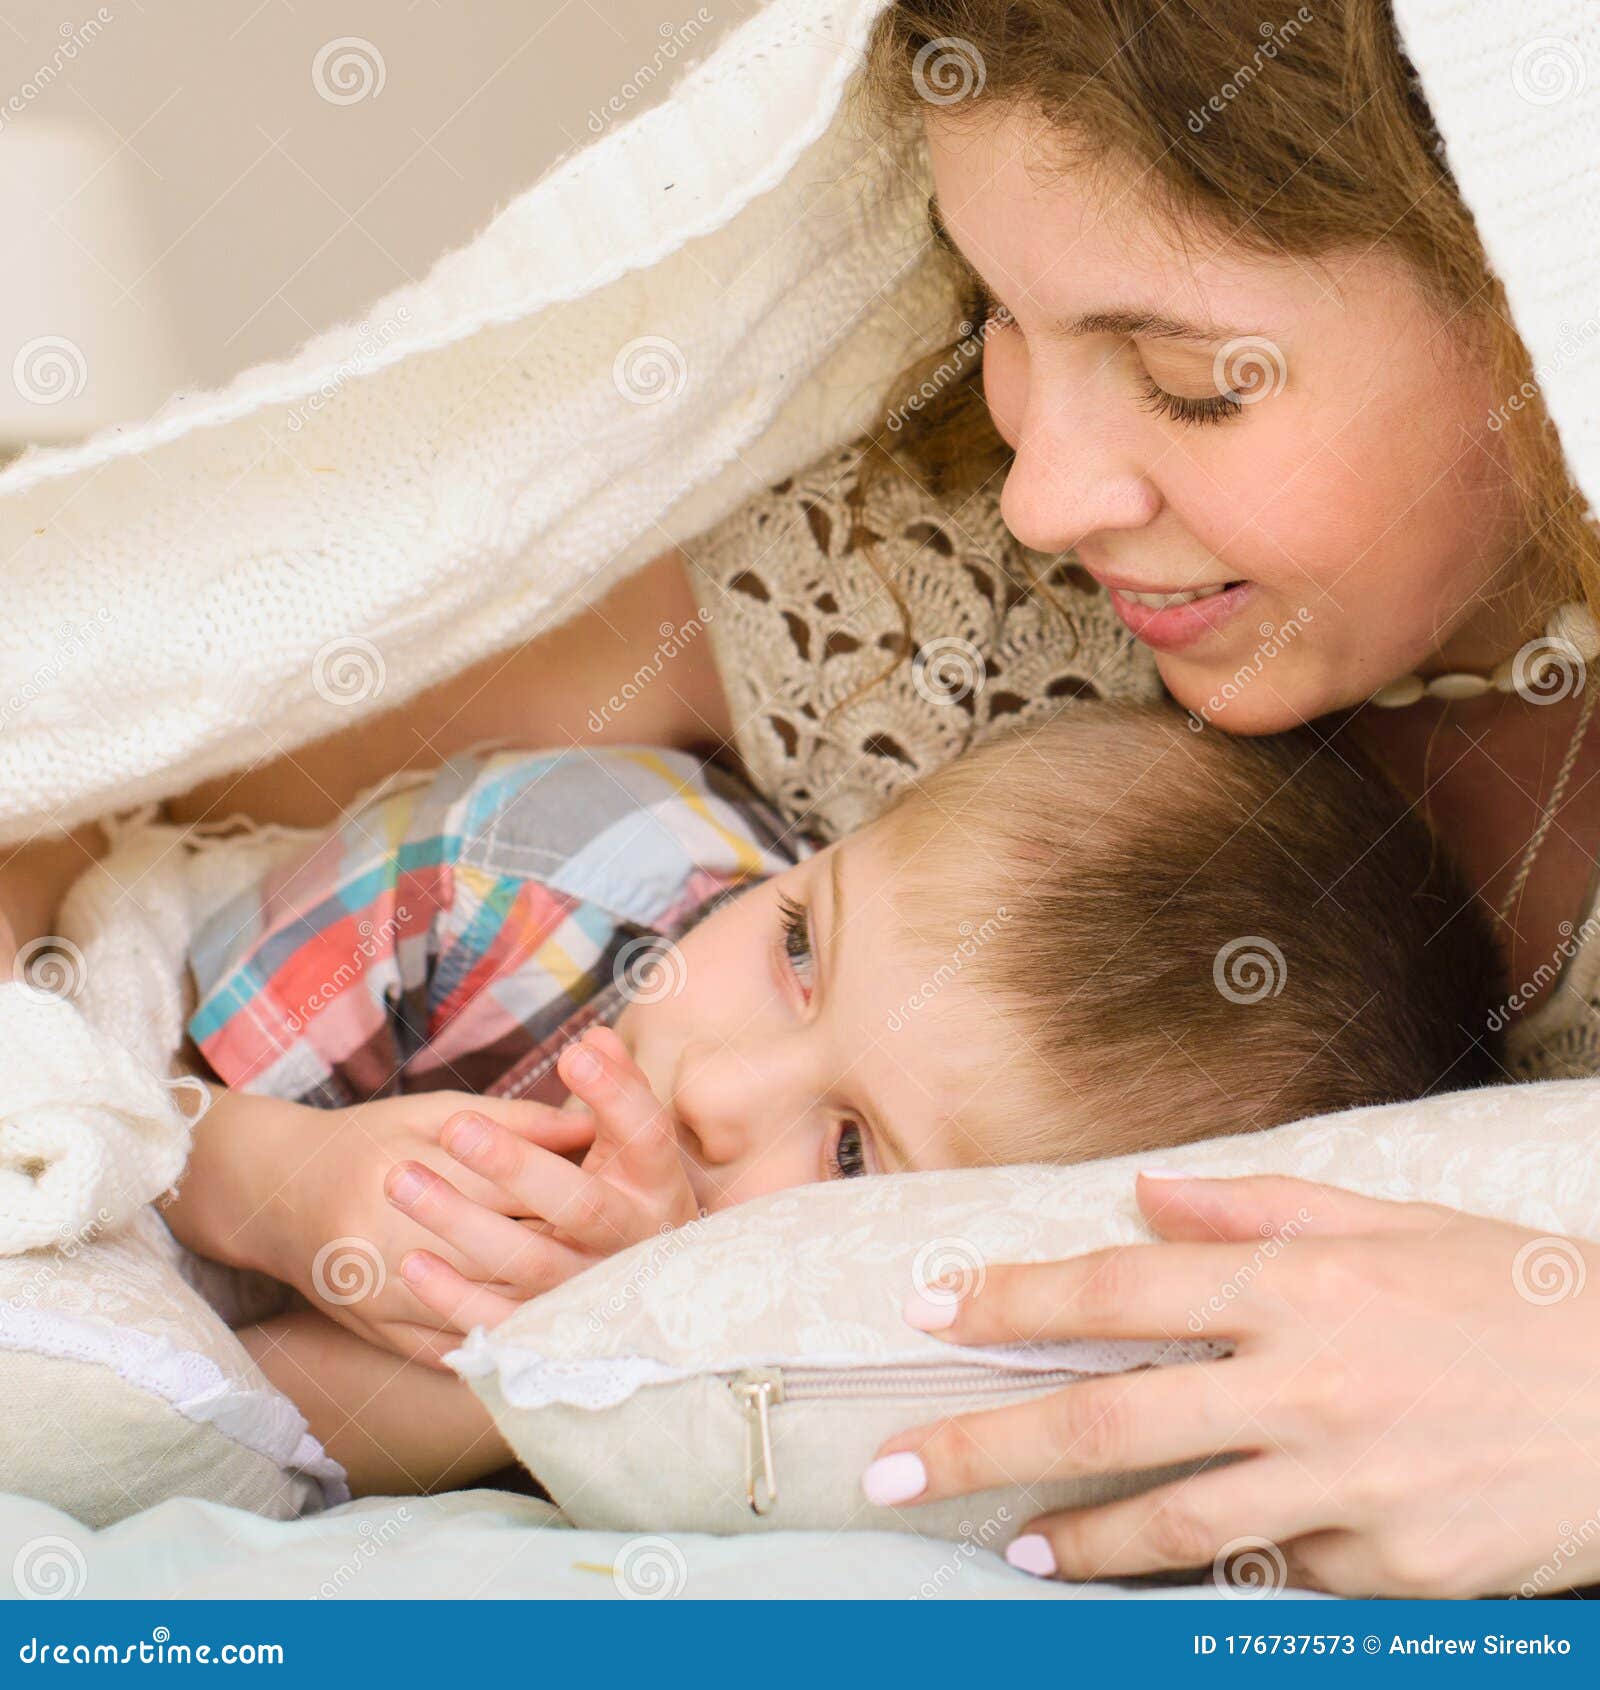 Mom Gently Looks At Her Son They Lying On Bed